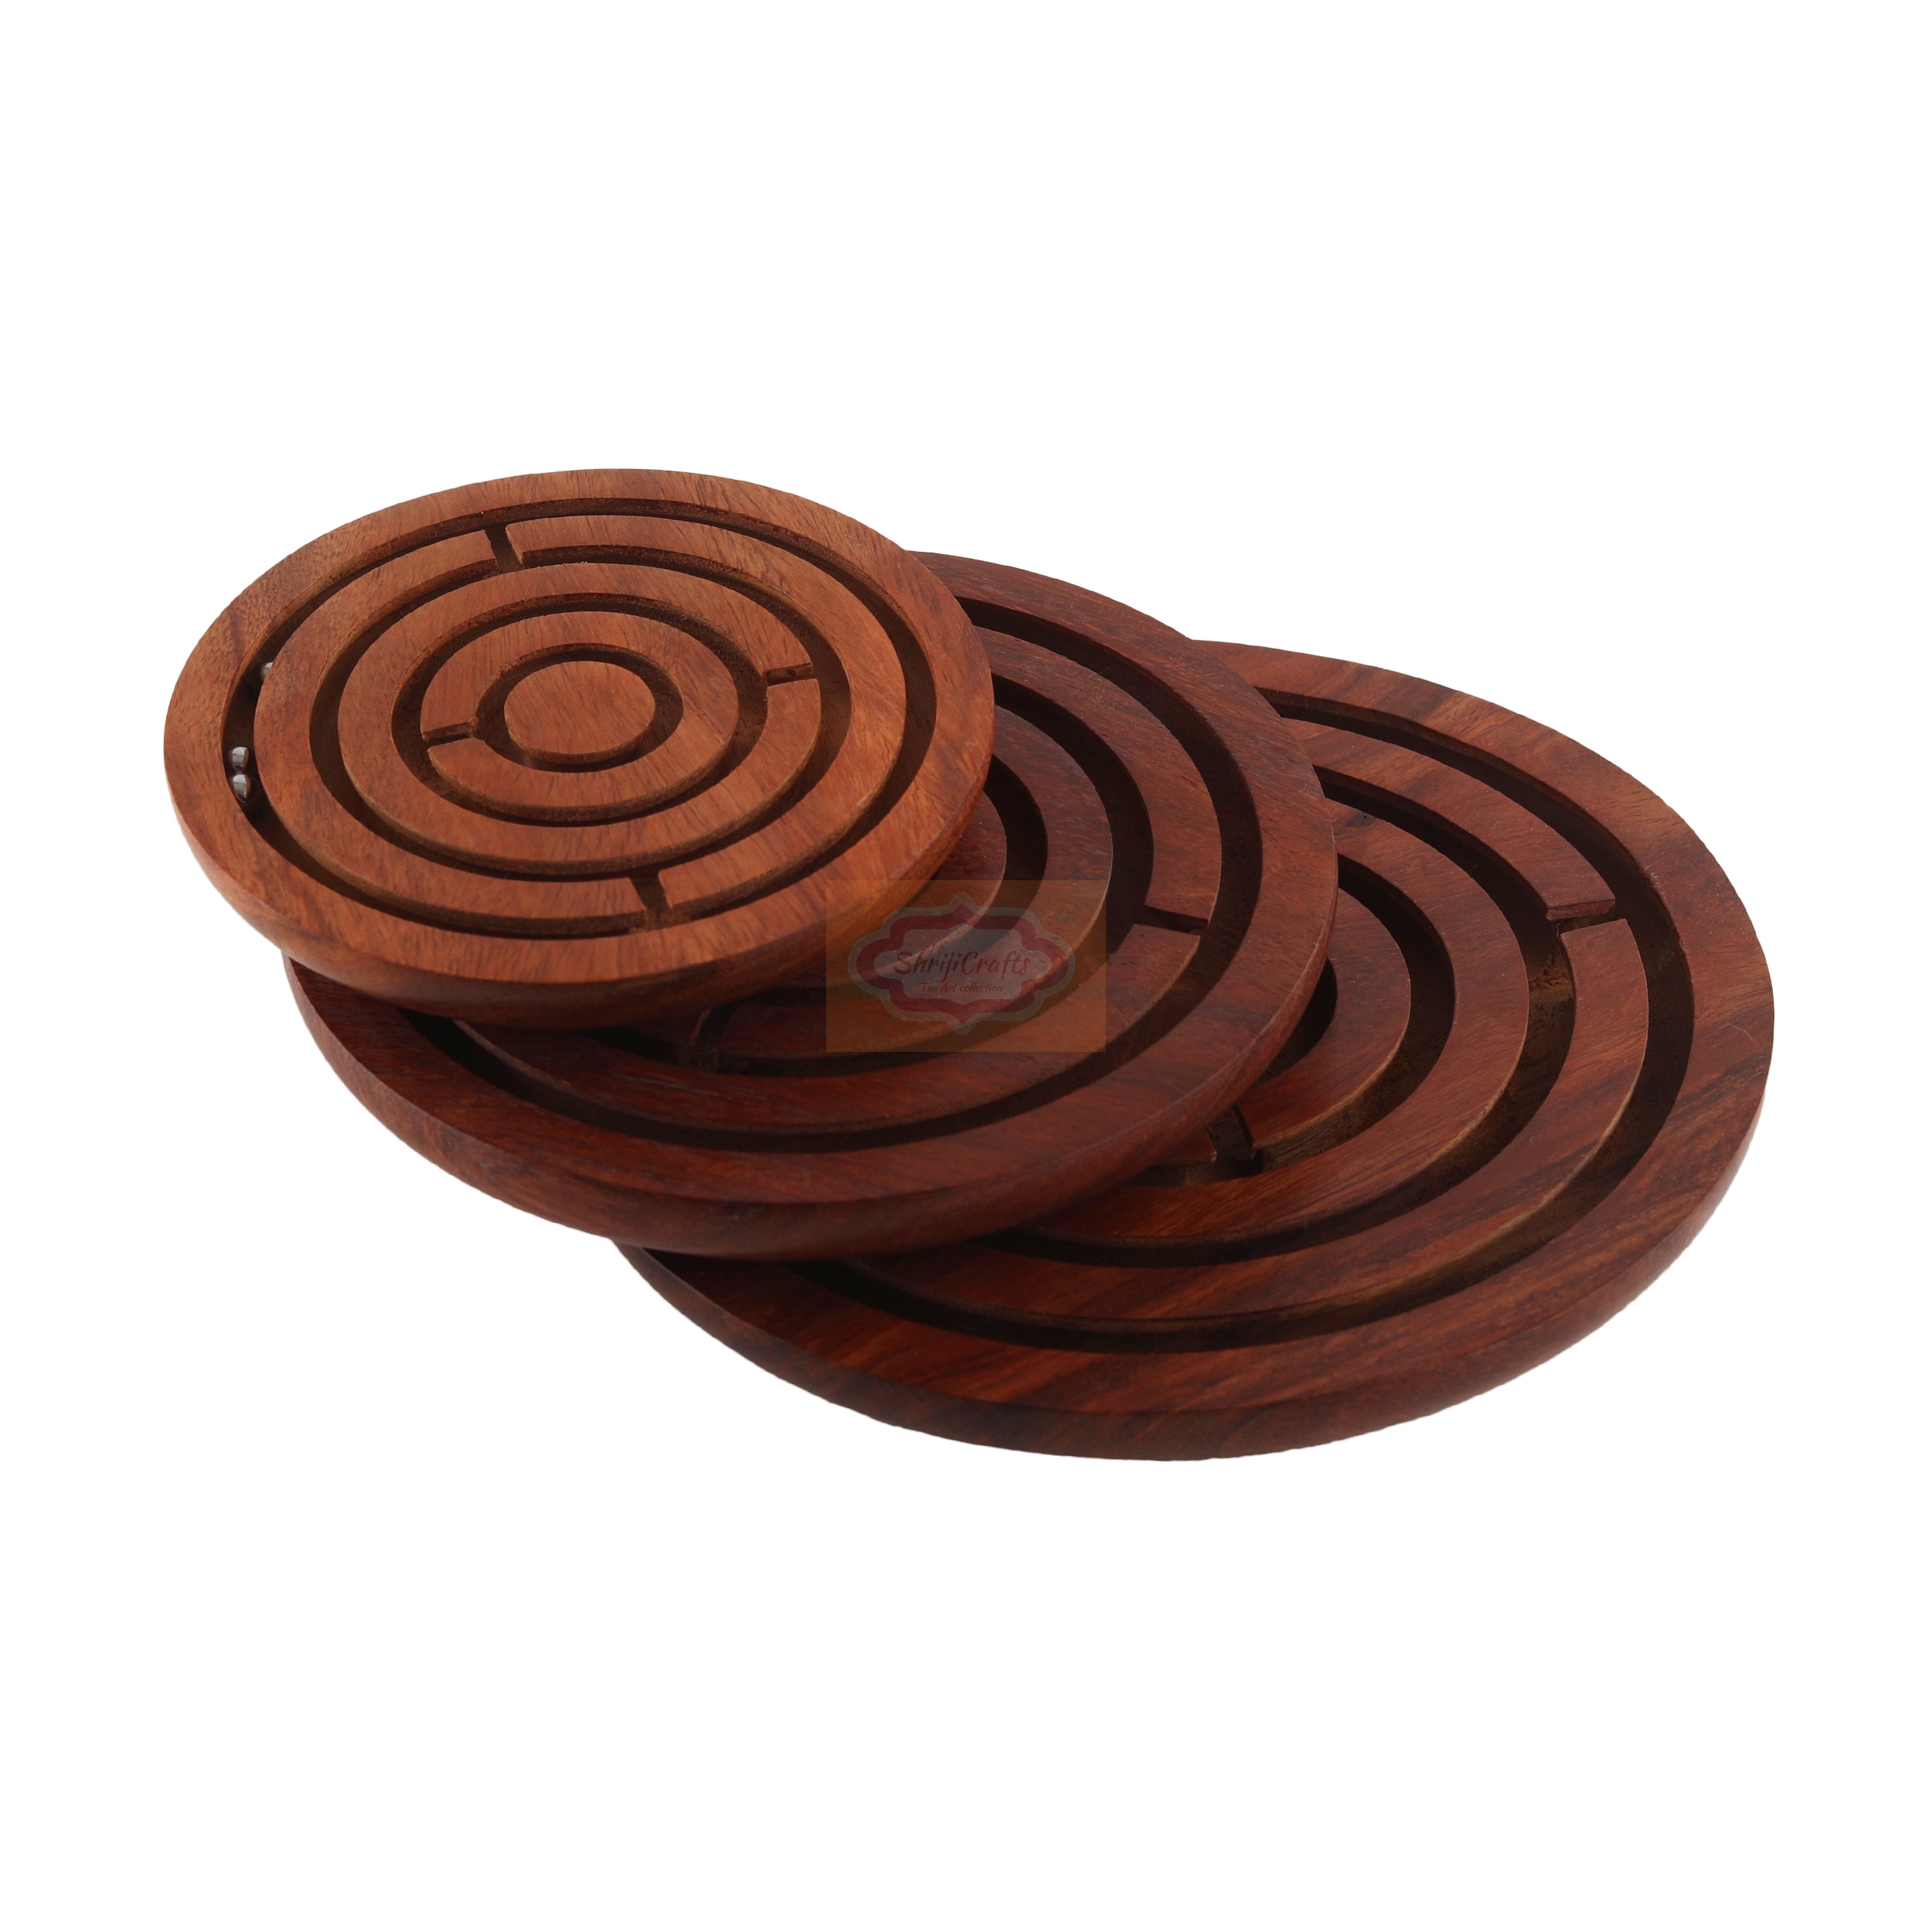 Shrijicrafts | ShrijiCrafts Wooden Labyrinth Ball-in-a-Maze Puzzle Game (Dia - 4 Inches) 6